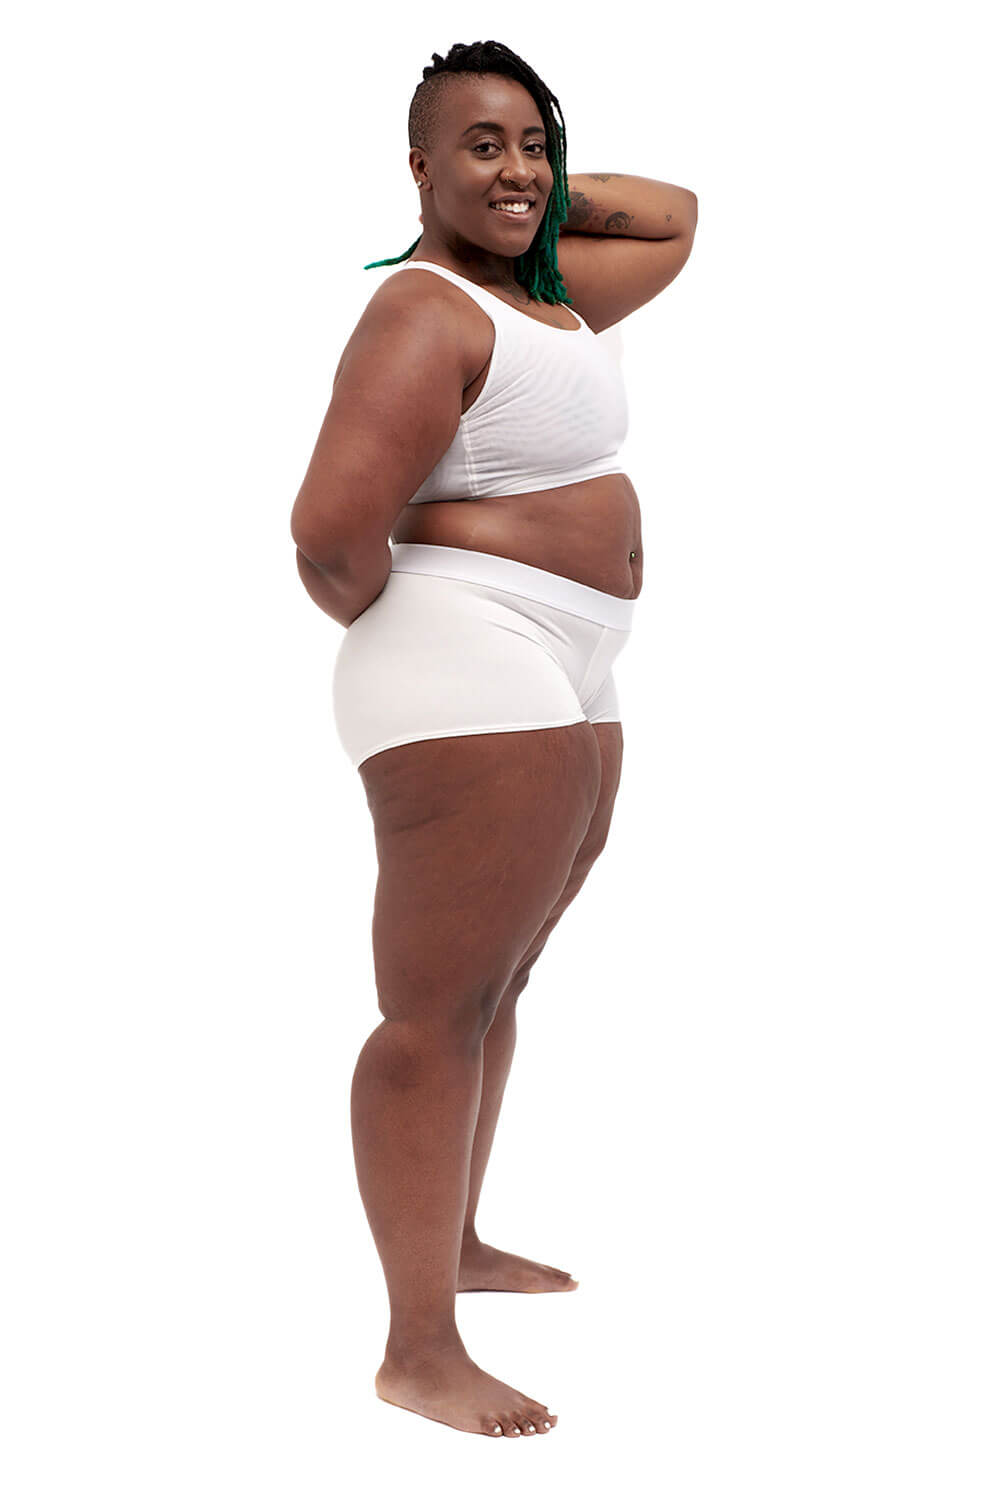 Plus-sized person wearing a white racerback chest binder made from breathable mesh, photographed from the side.